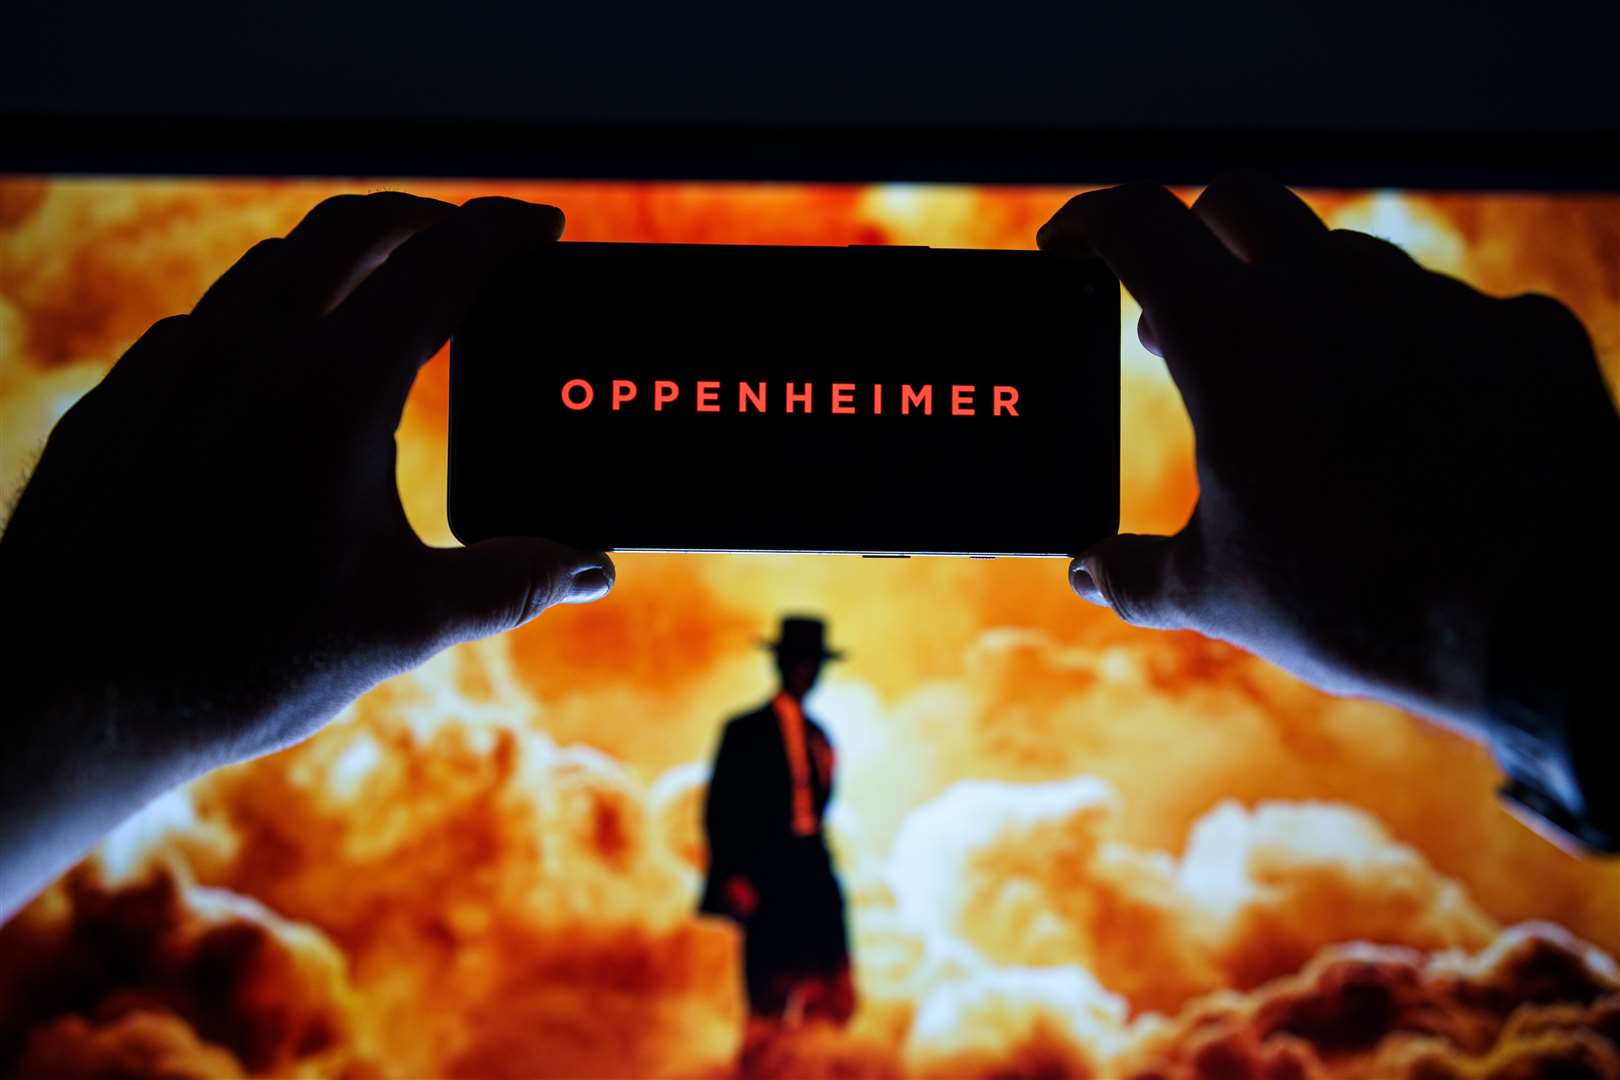 Oppenheimer movie logo and poster on screen. Picture: AdobeStock